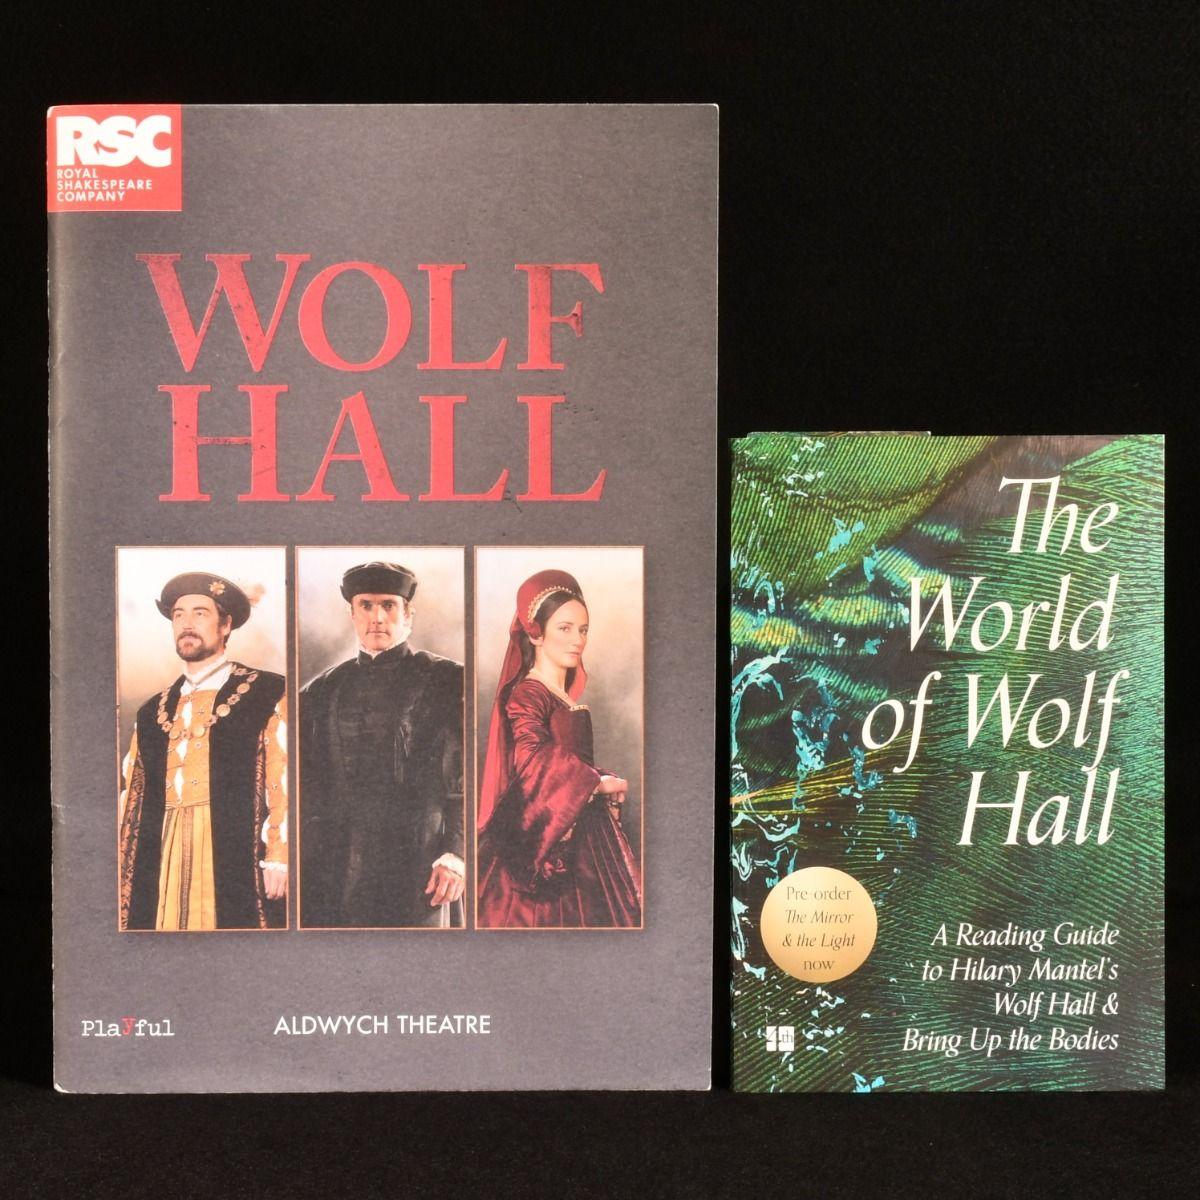 2009-20 Wolf Hall, Bring Up the Bodies, Mirror and the Light im Angebot 8